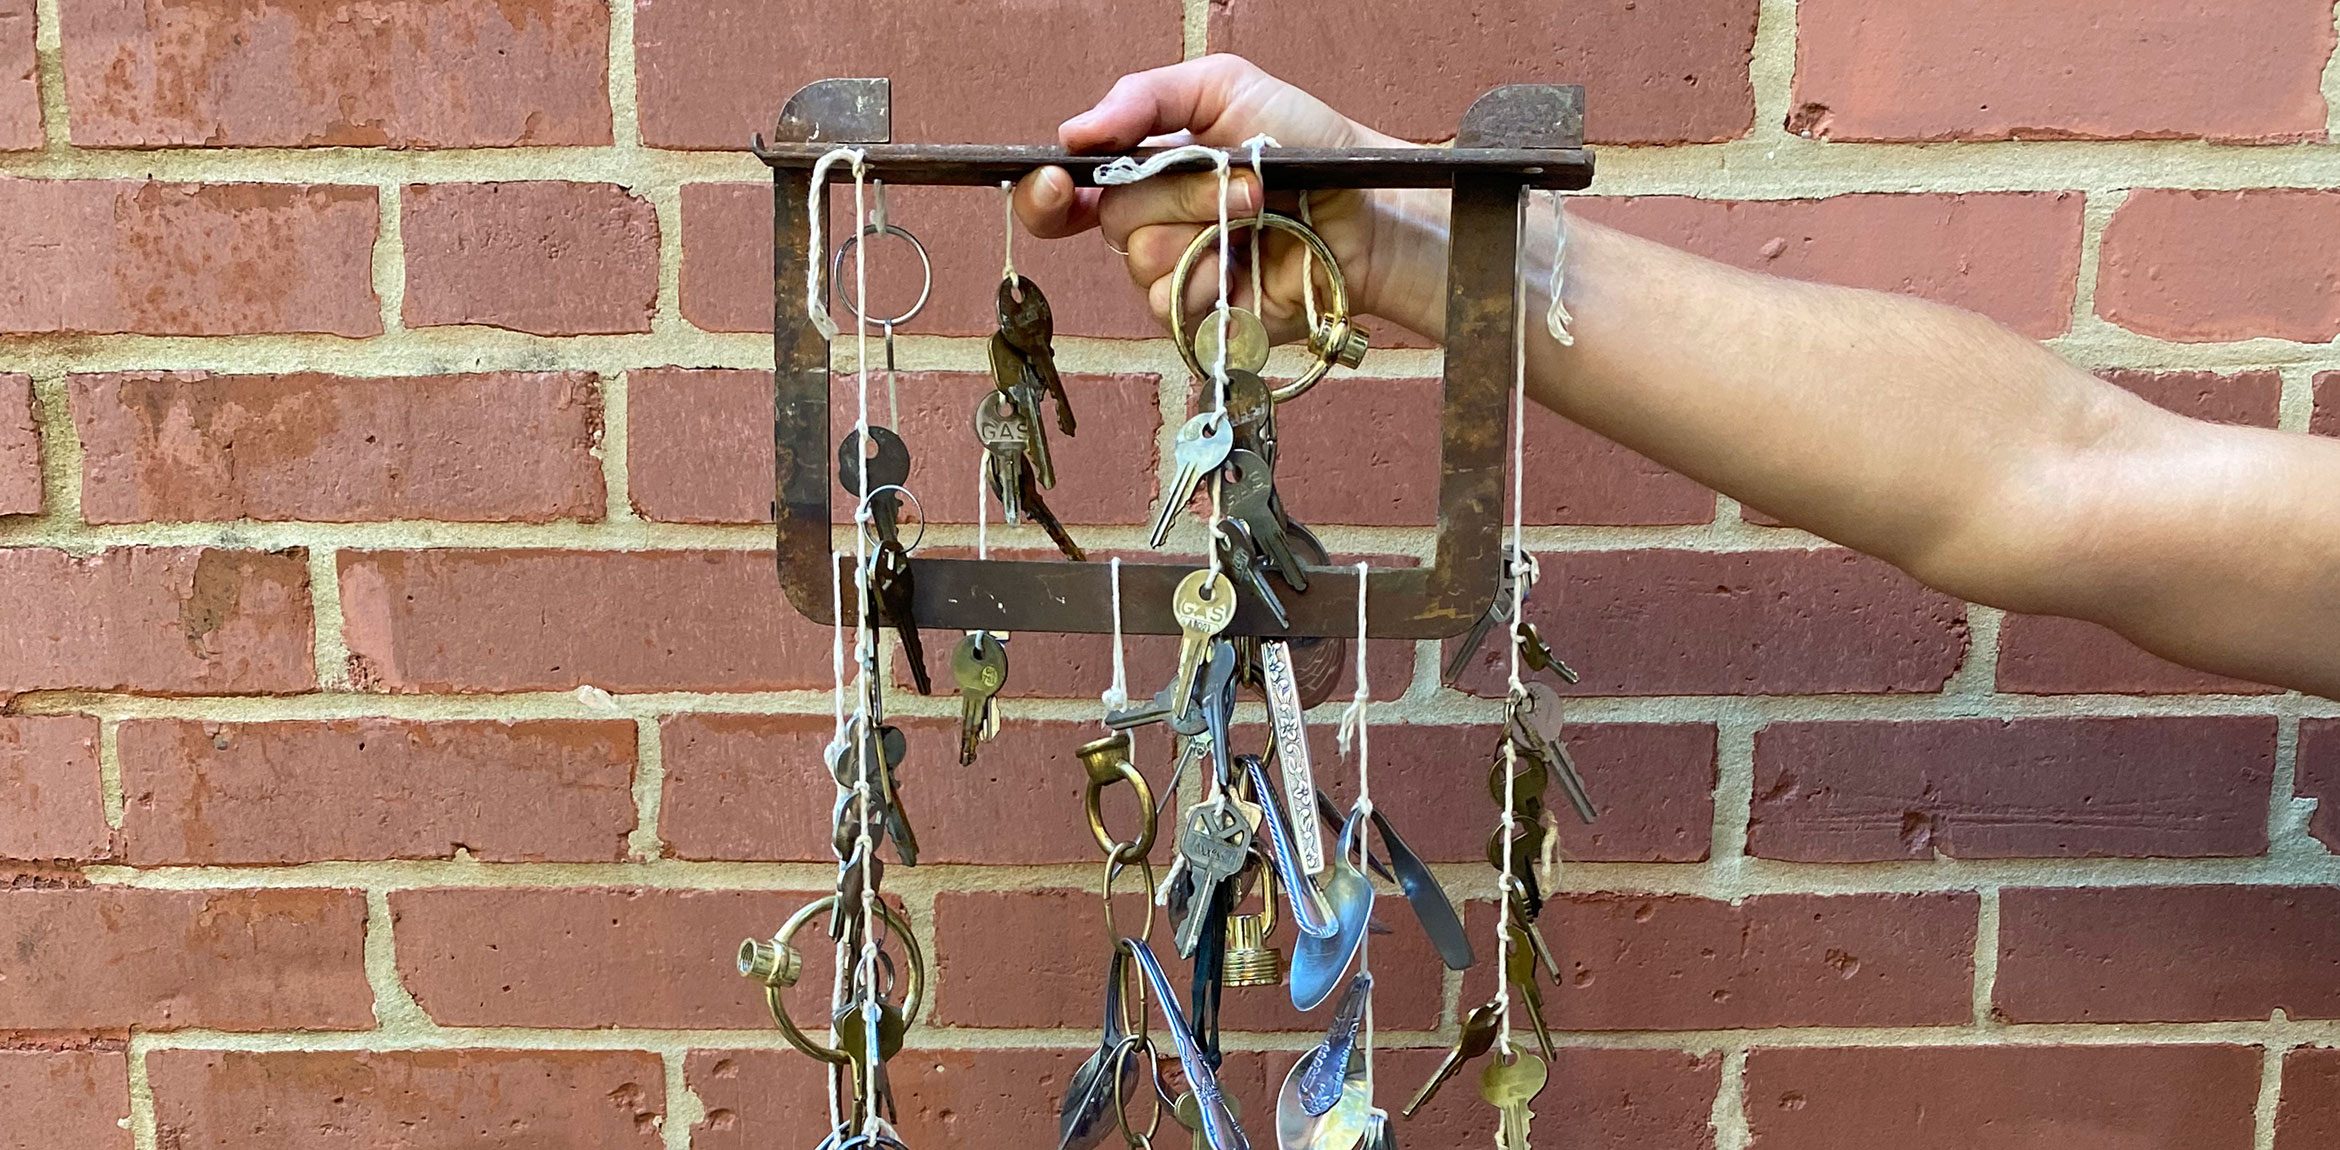 An individual holds up a metal square piece with keys and chains strung from it with string in front of a brick wall.